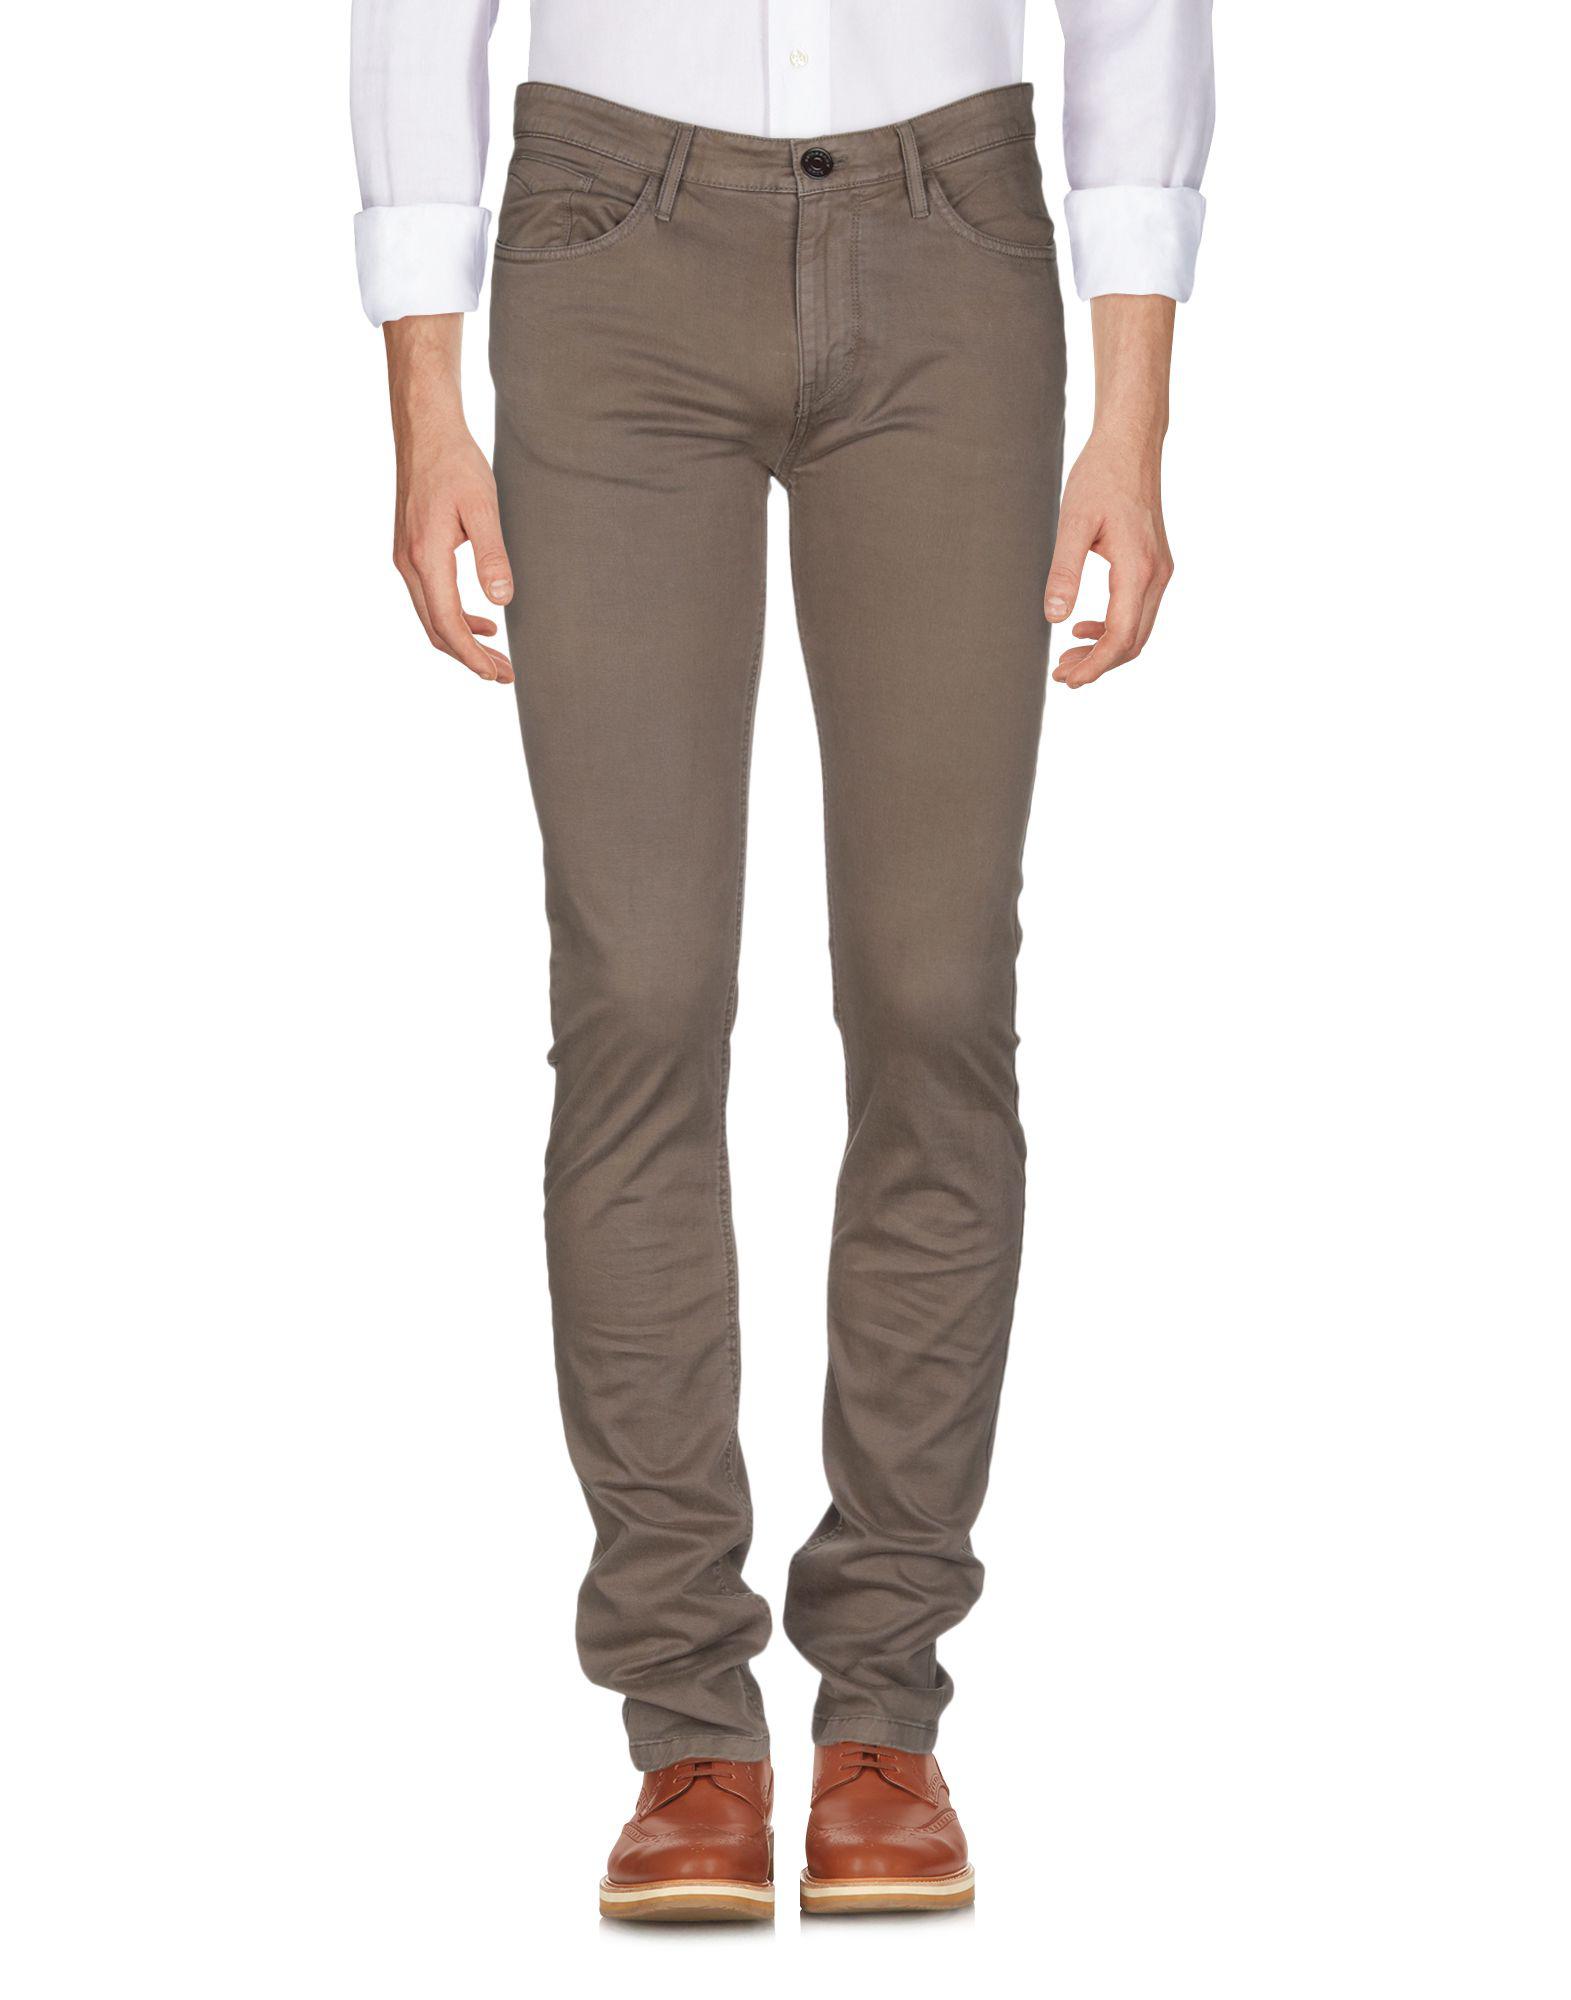 Burberry Casual Pants in Brown for Men - Lyst